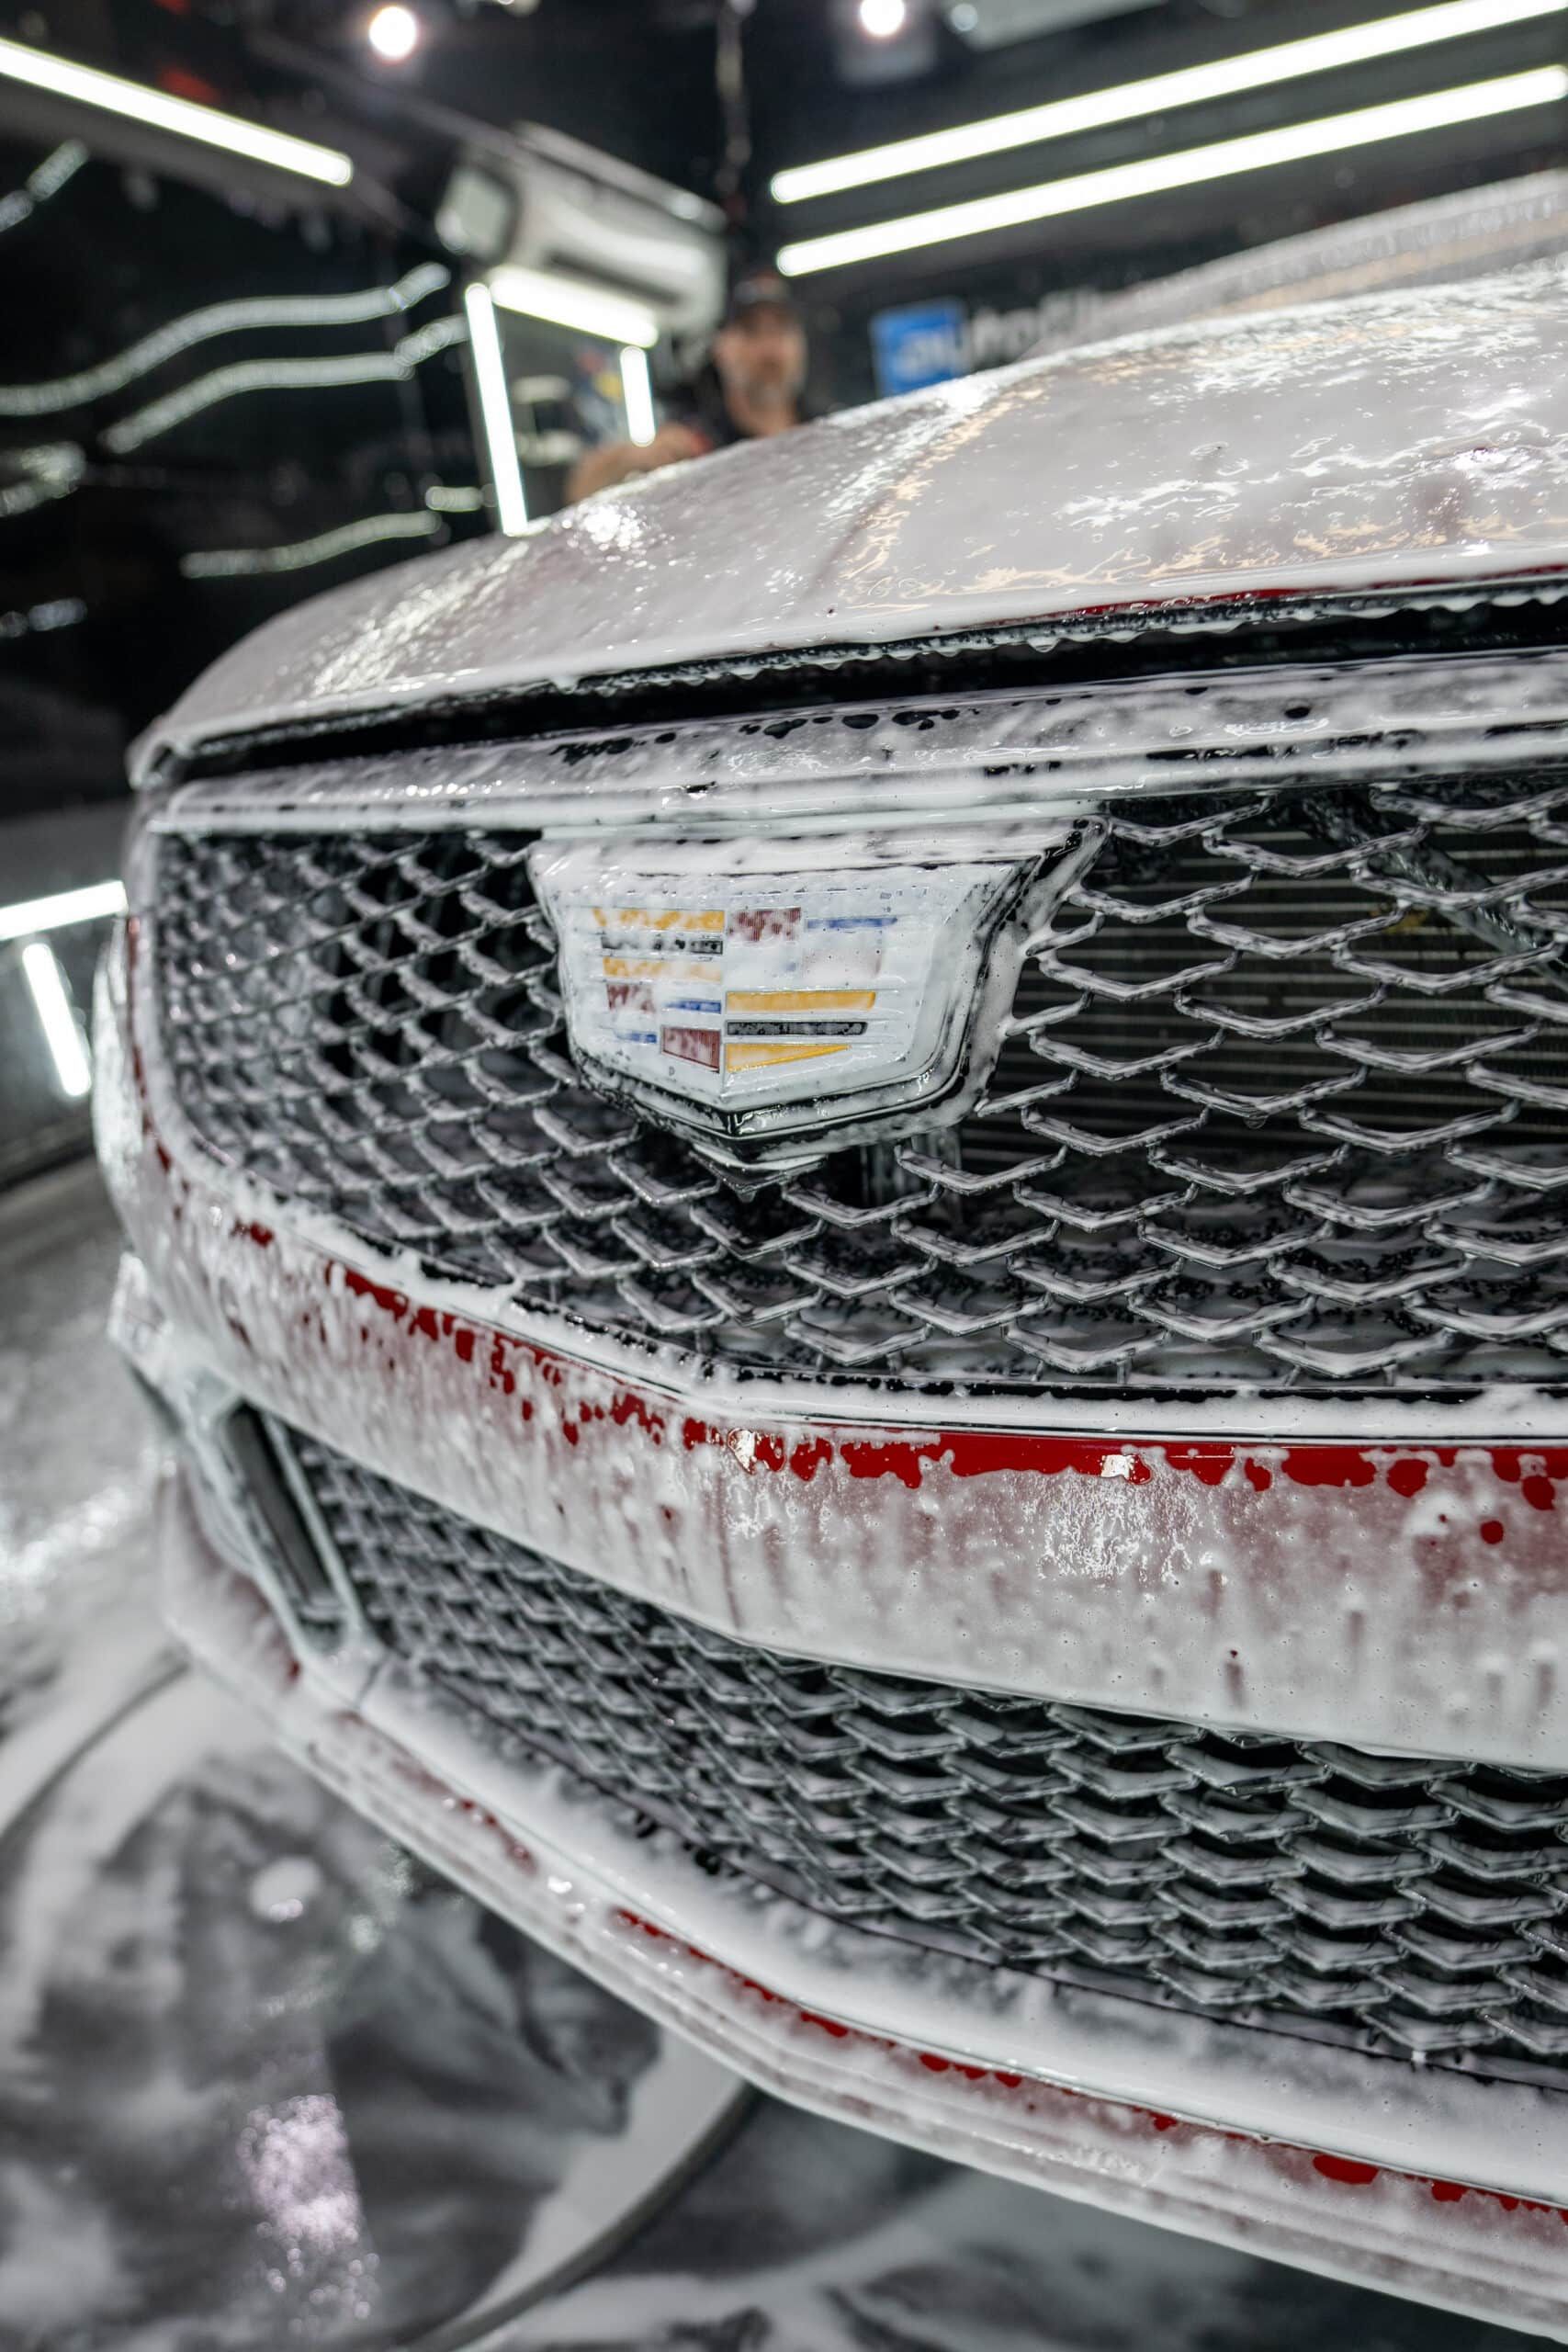 The front of a cadillac is covered in foam.